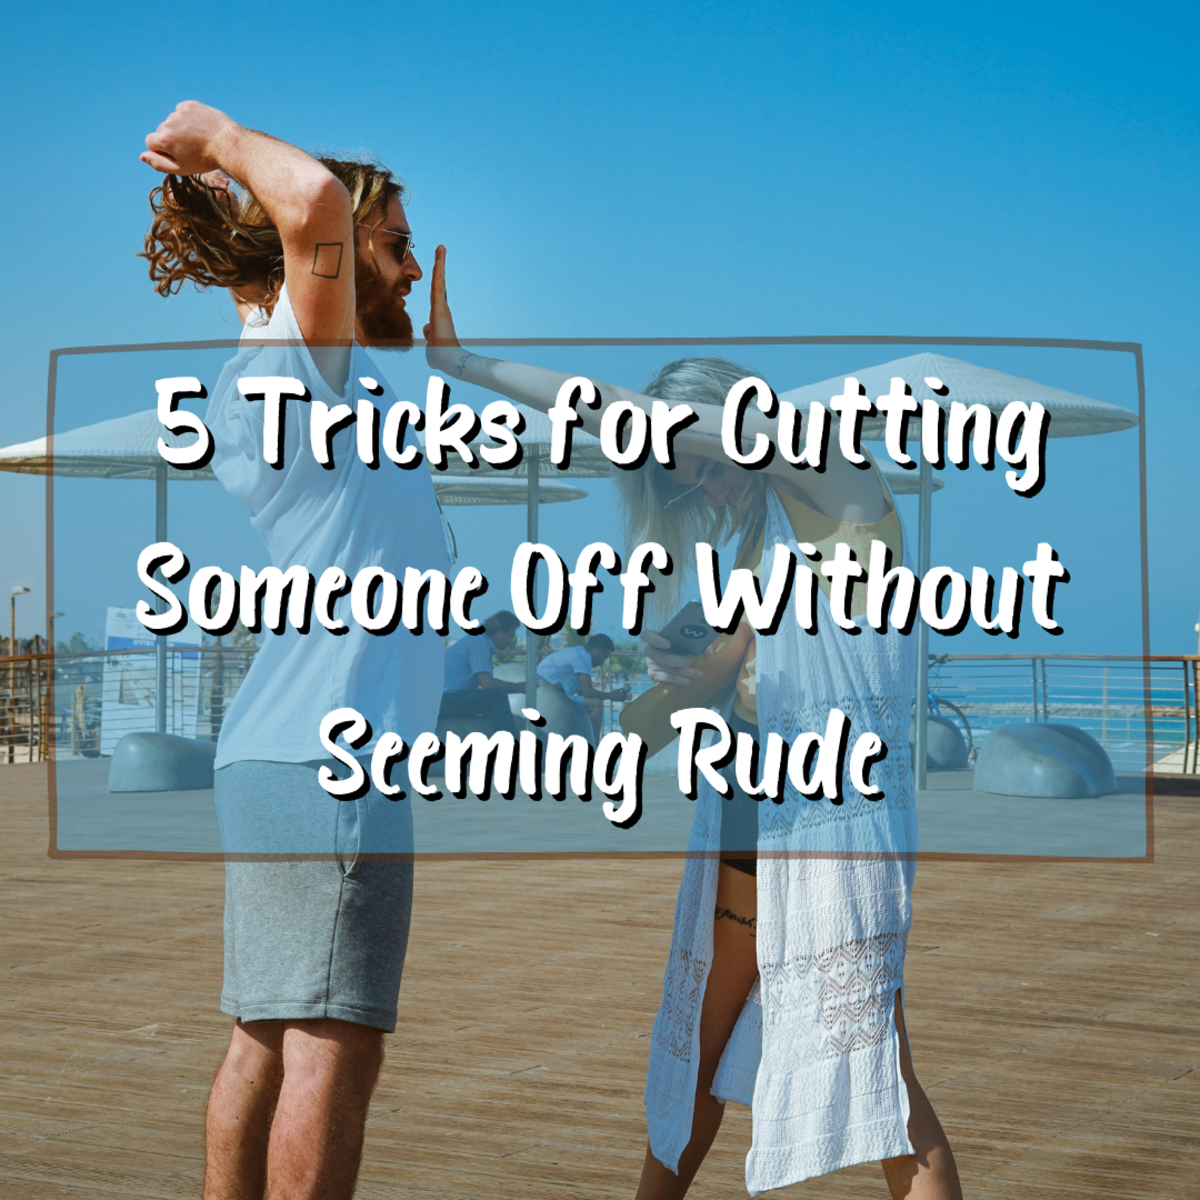 How to Cut Off a Friend Without Seeming Rude: 5 Mind Tricks